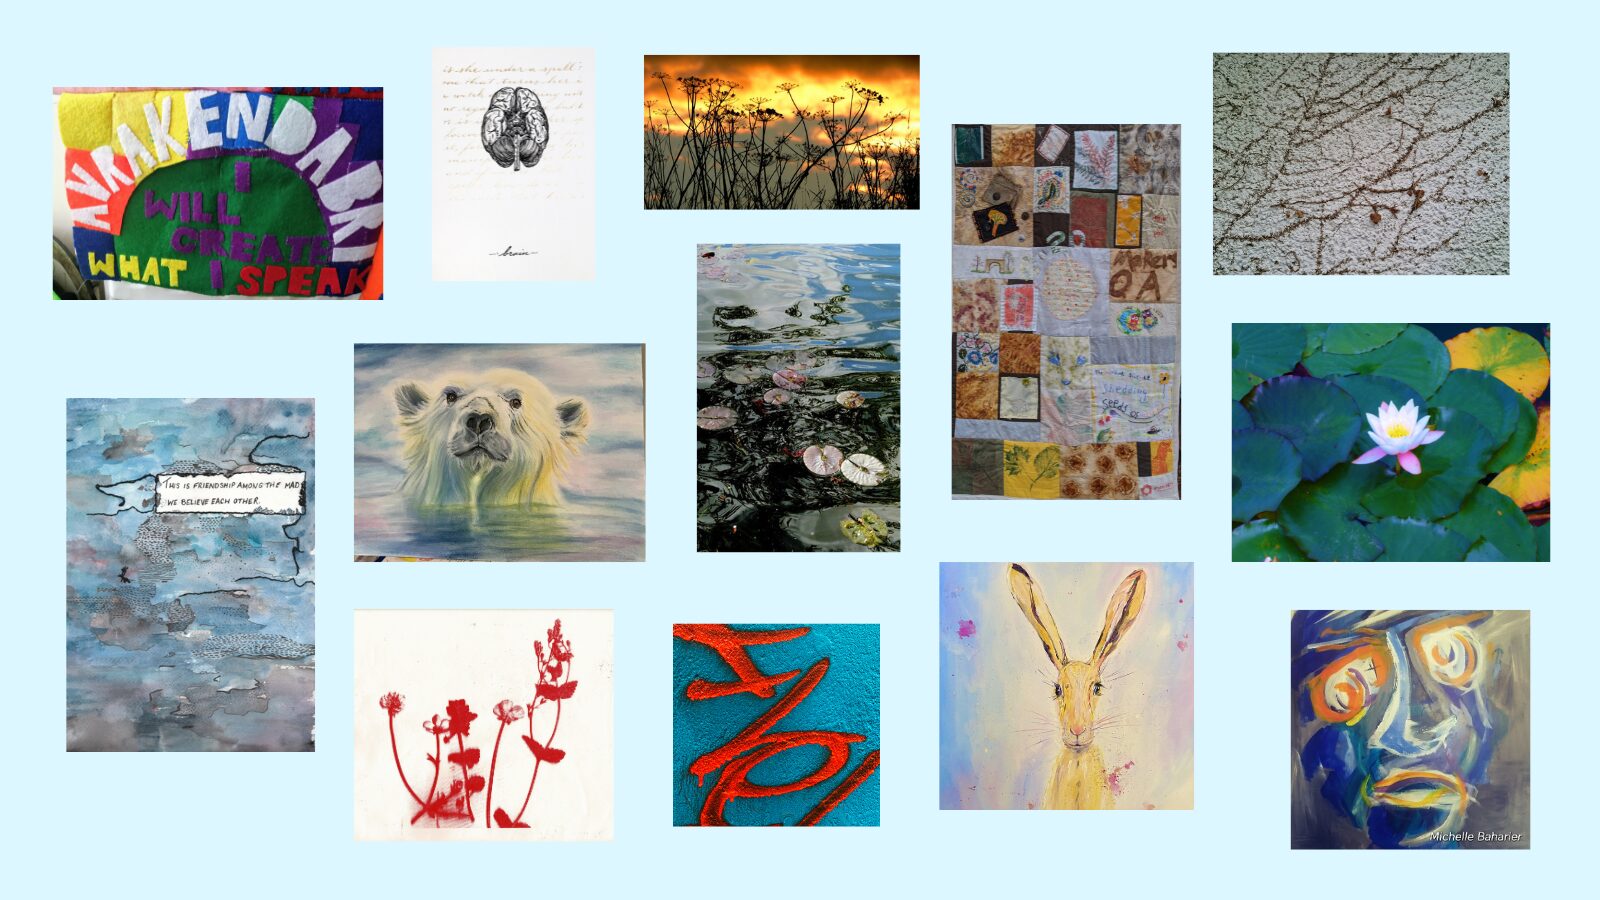 A graphic showing a collection of images from the creative exhibition: a mixture of paintings, drawings, and photographs